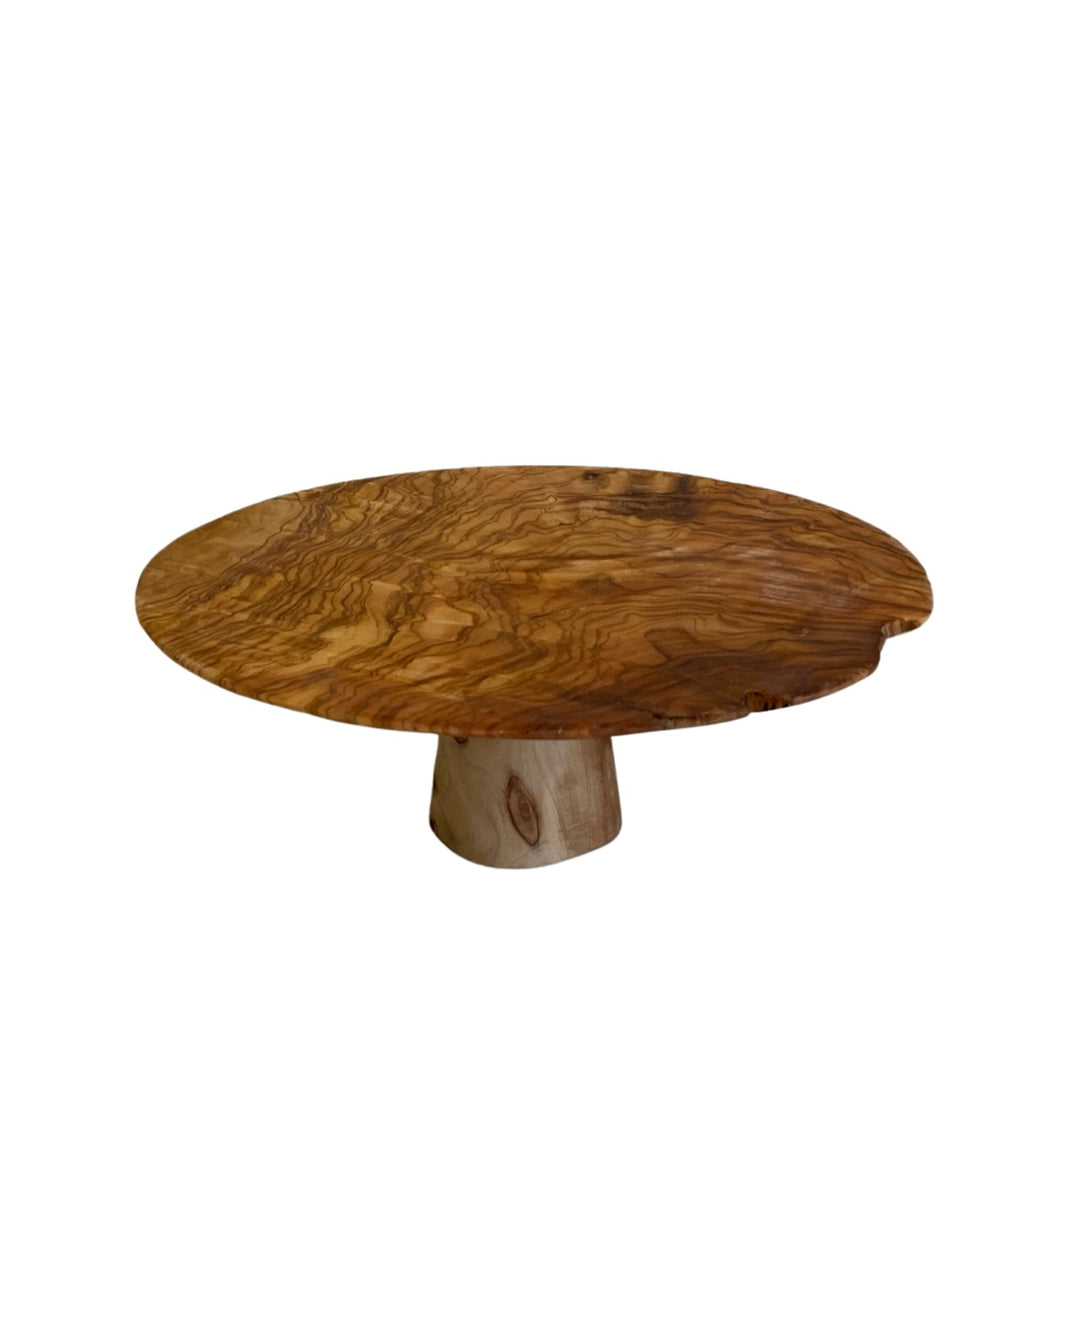 Rustic wooden cake stand